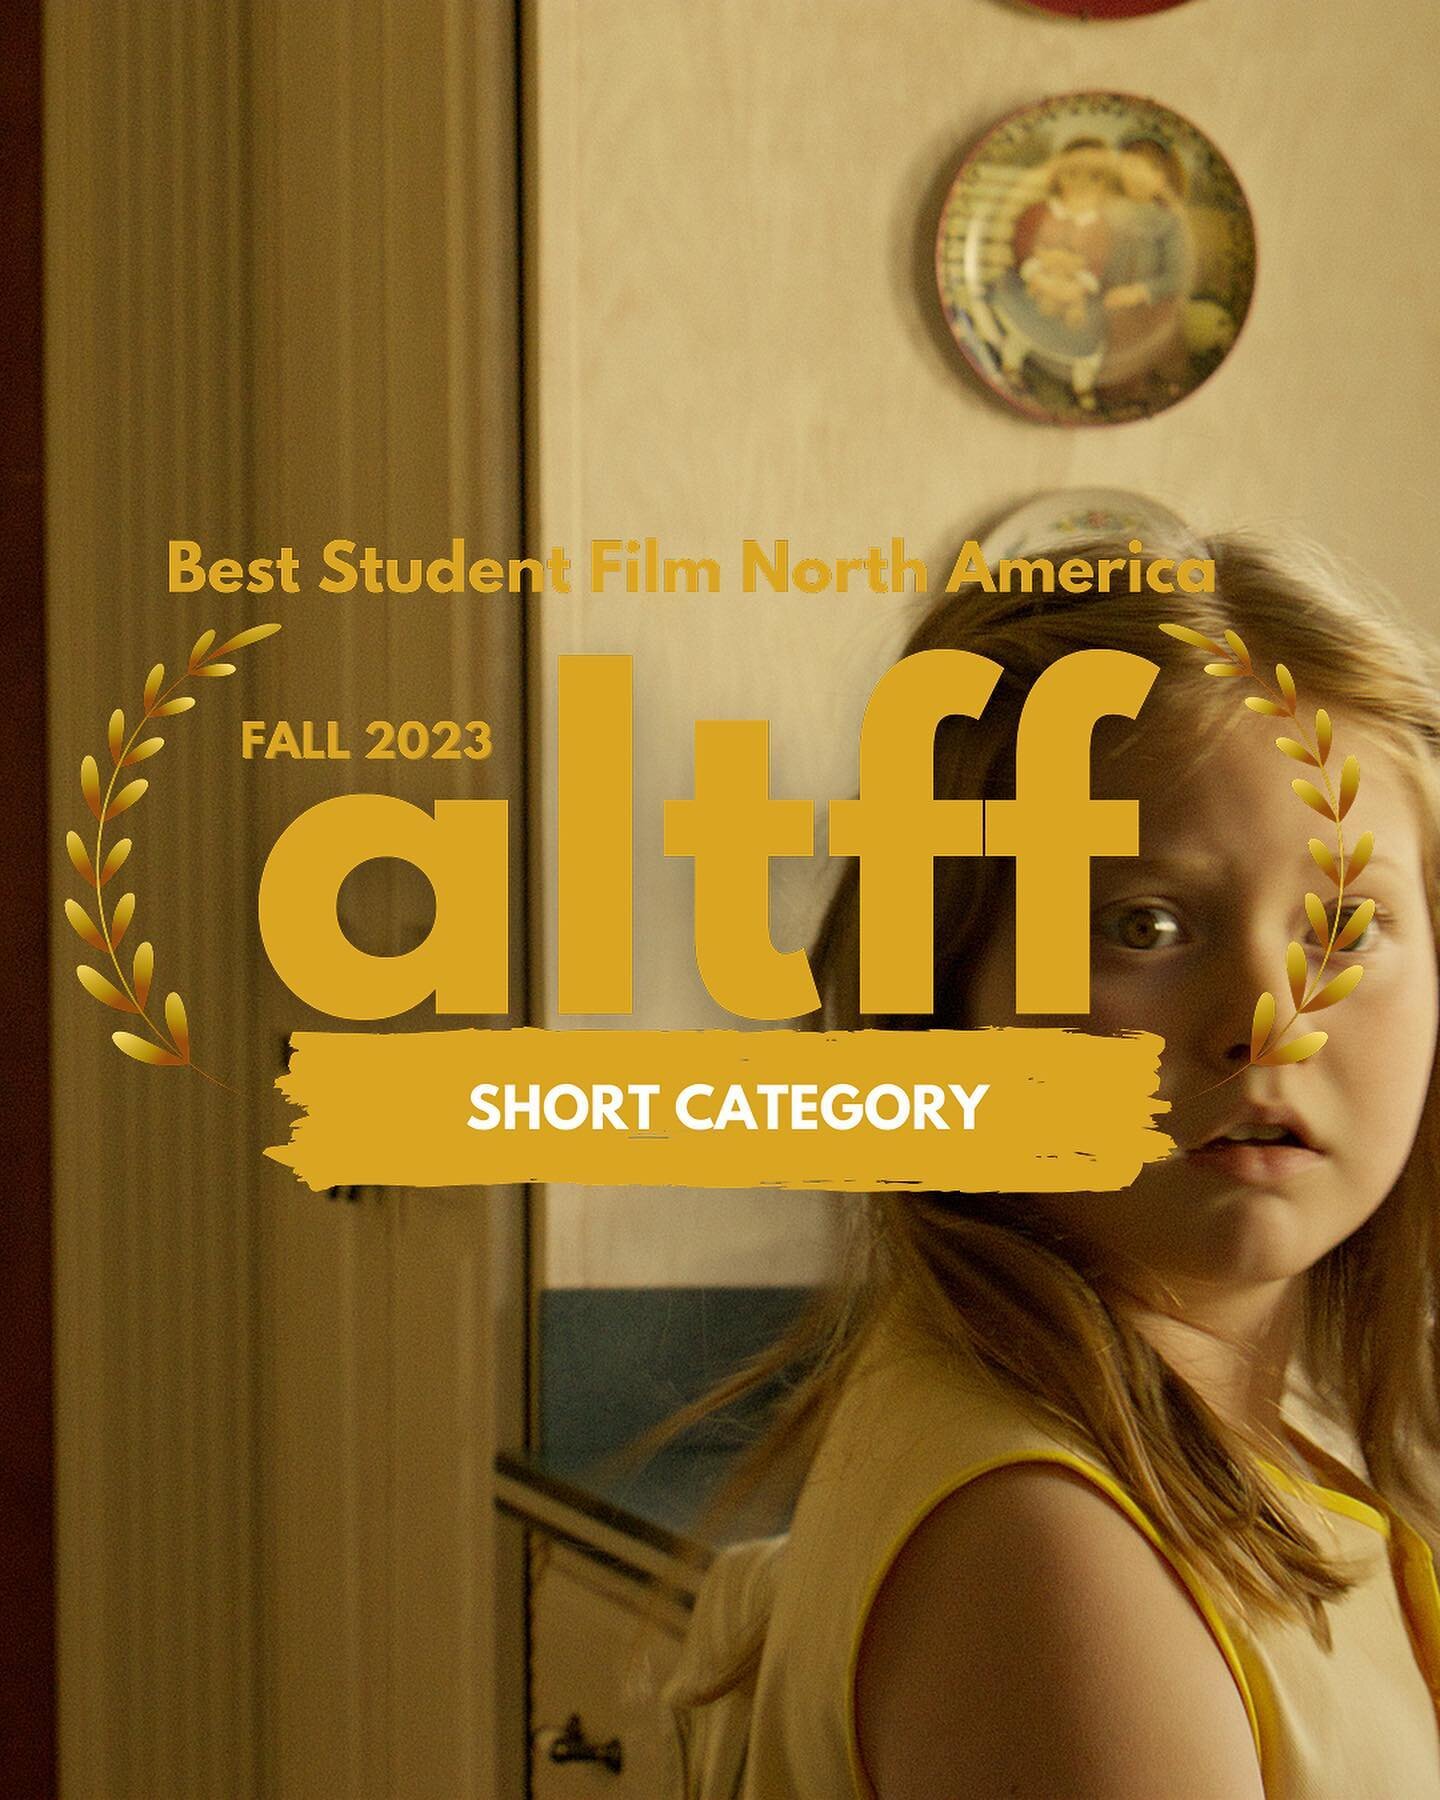 we're beaming from ear-to-ear! daisies has been awarded the Best Student Film North America at the @alternativefilmfestival. 

this is such an incredible honor for the entire team, and we couldn't be prouder. thank you for your continuing support!